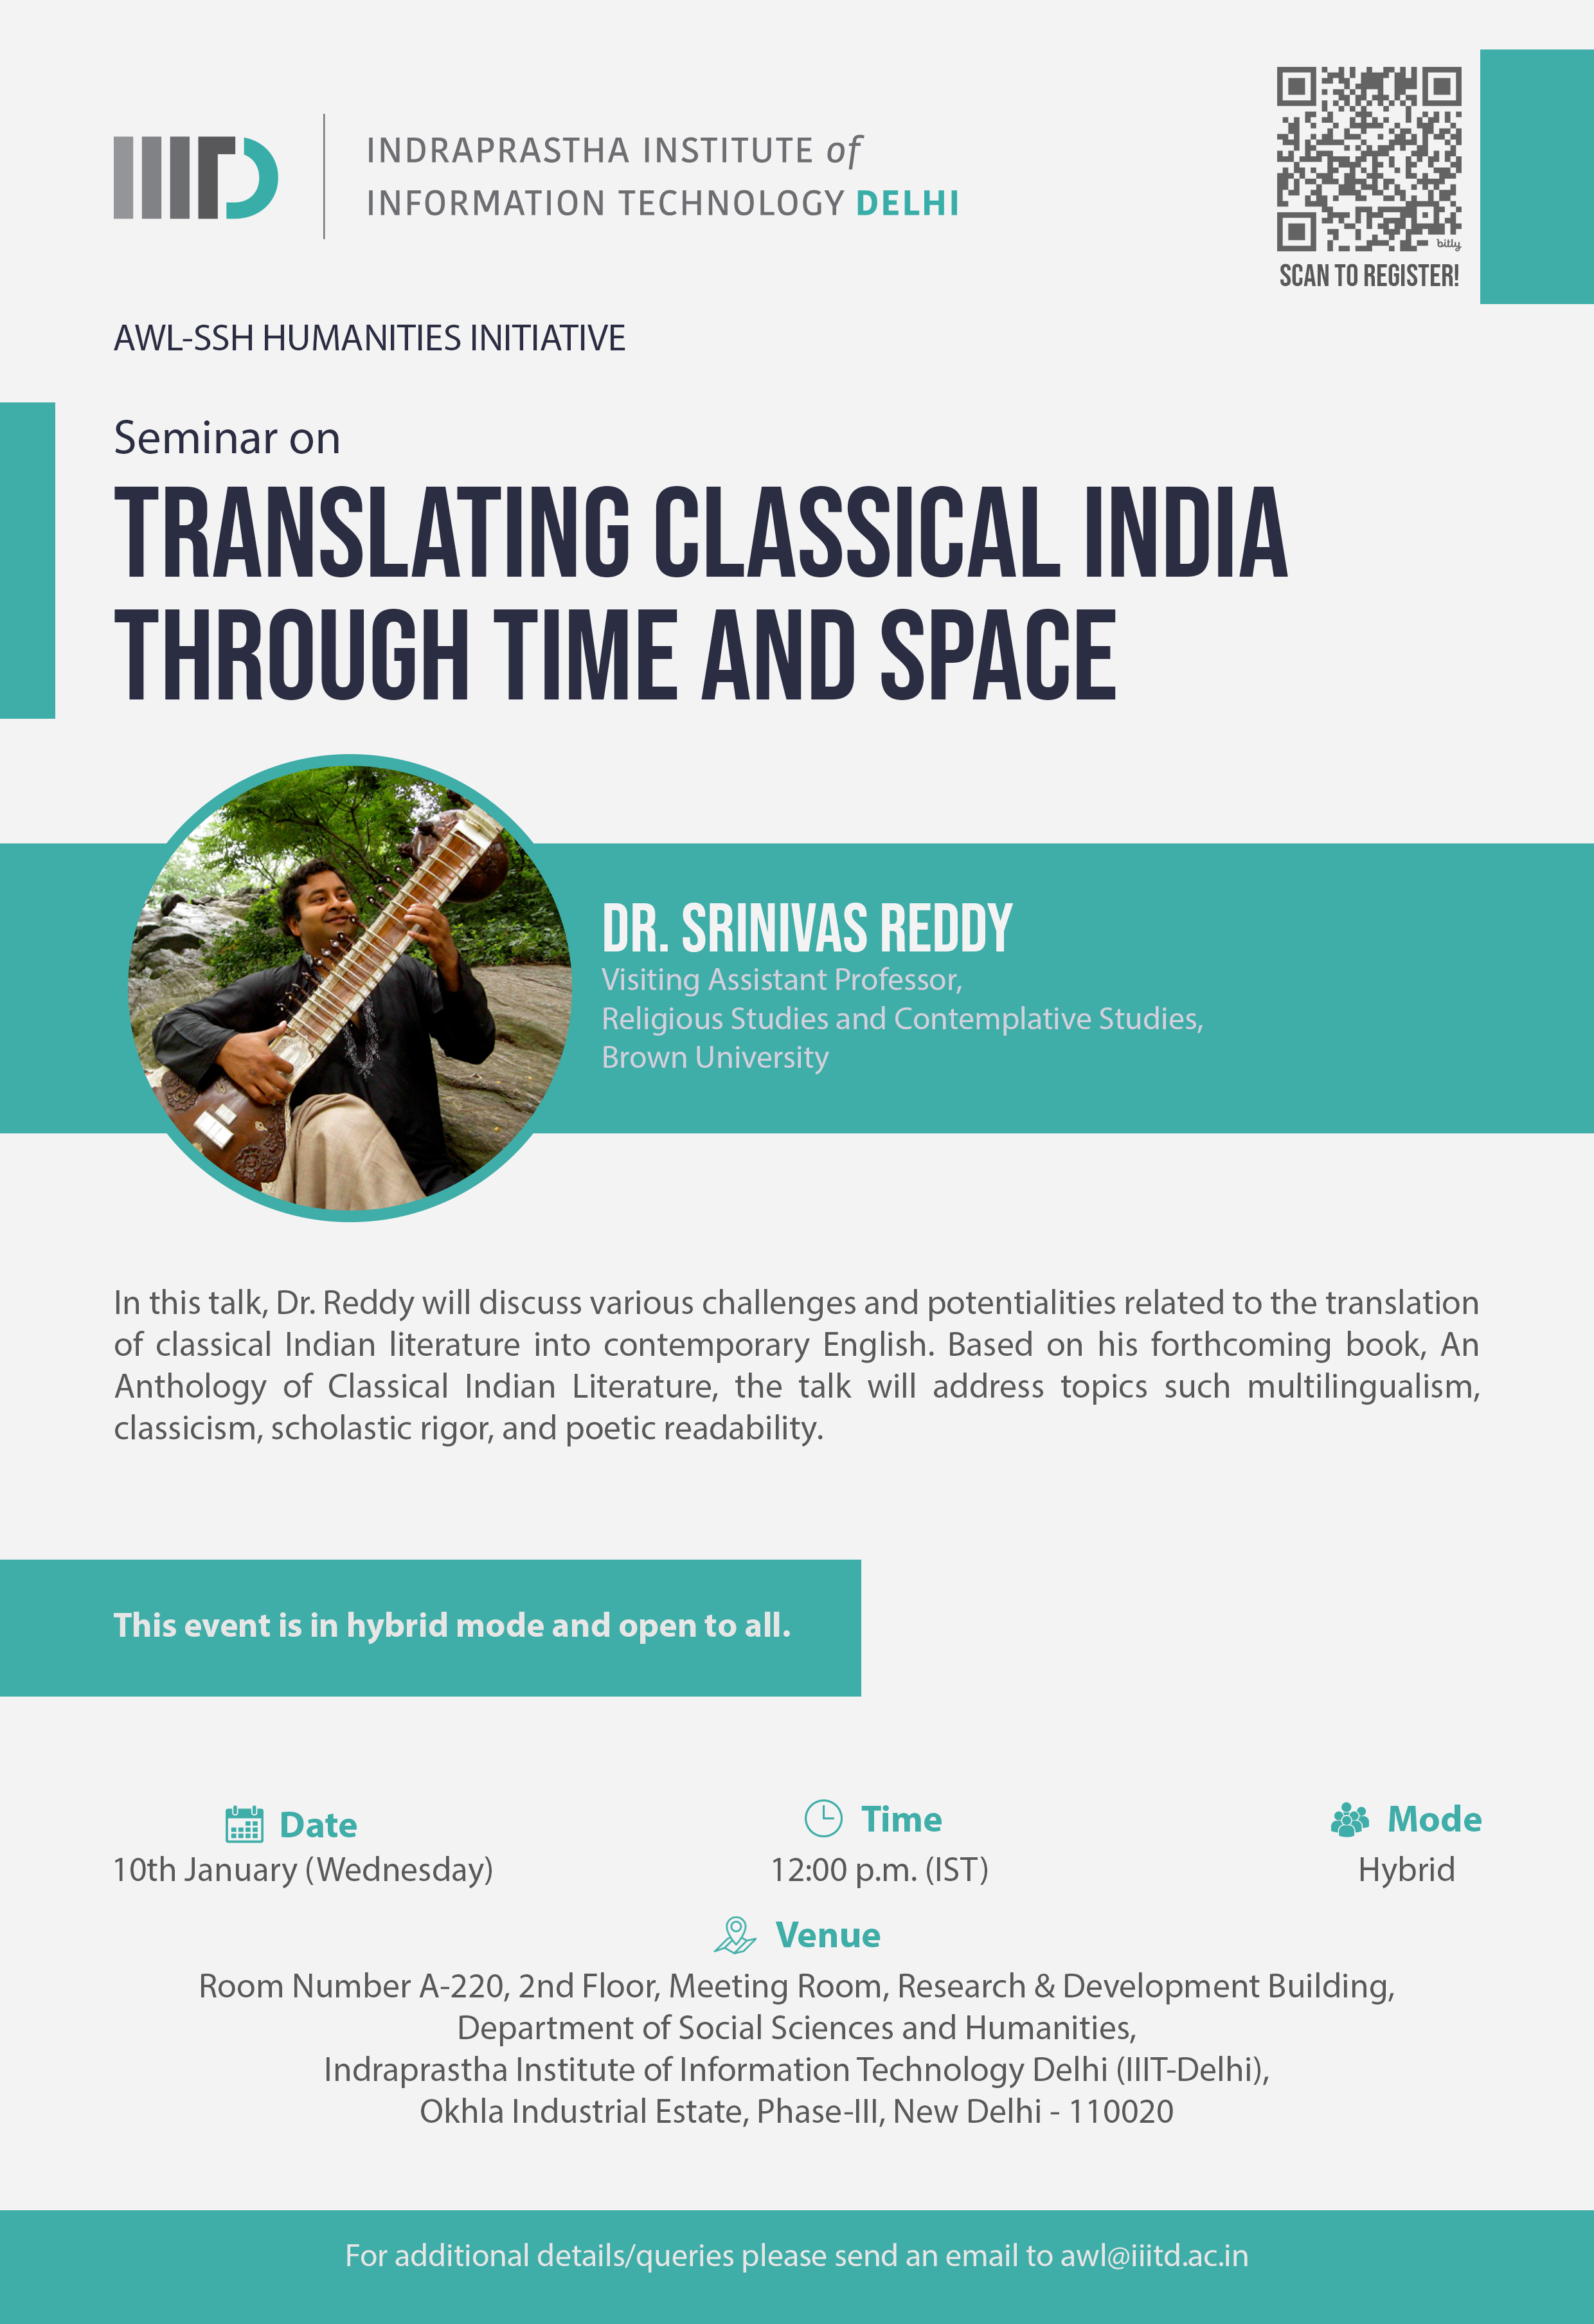 Translating Classical India Through Time and Space